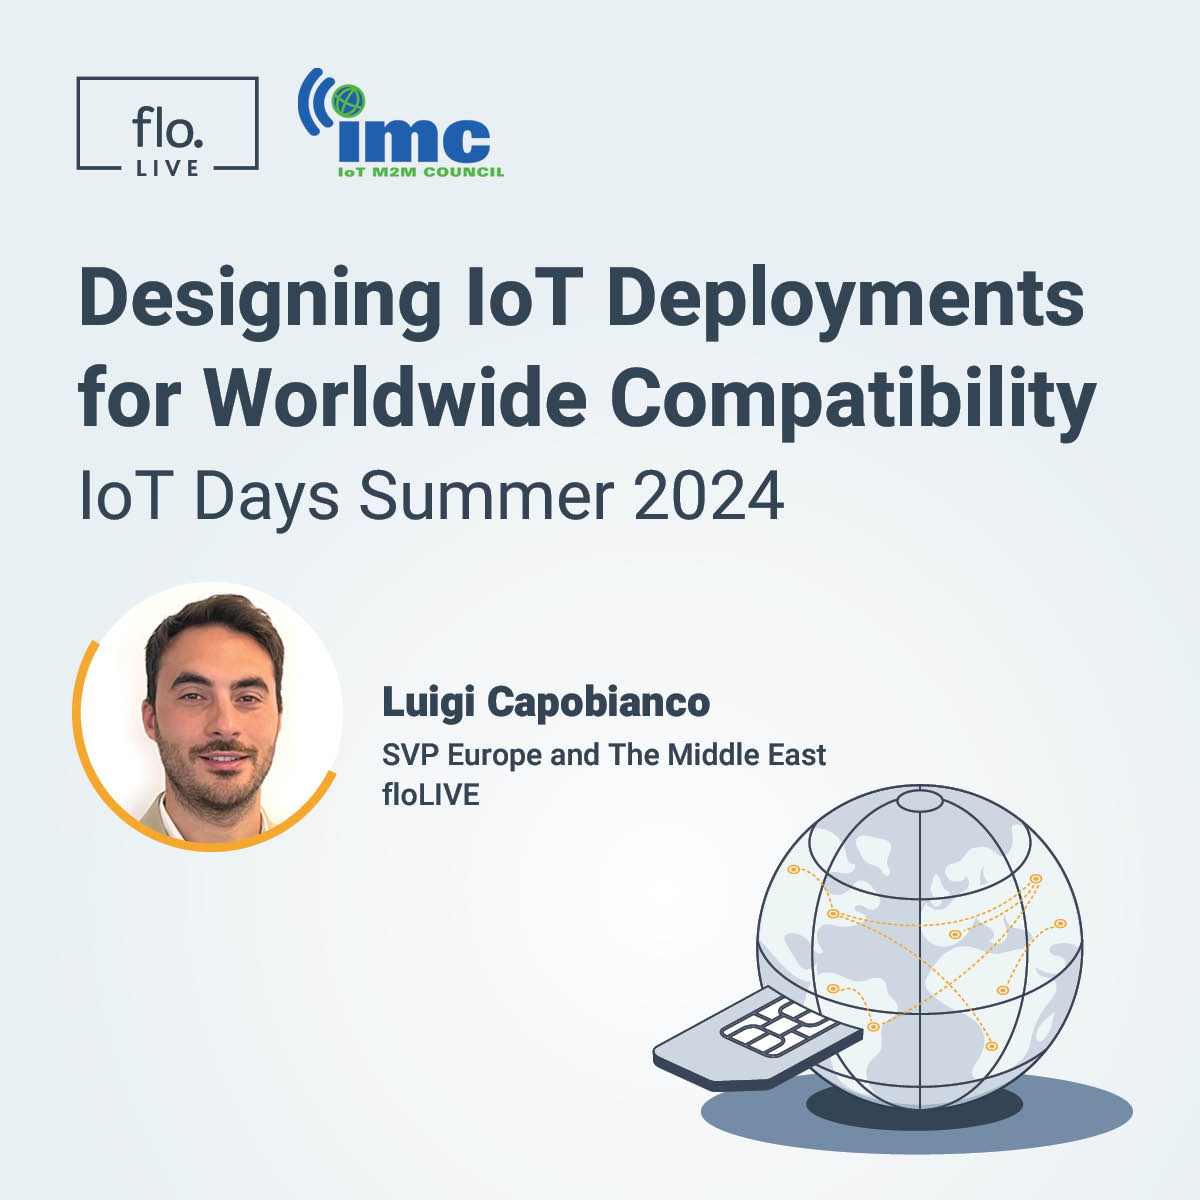 Designing IoT Deployments for Worldwide Compatibility image